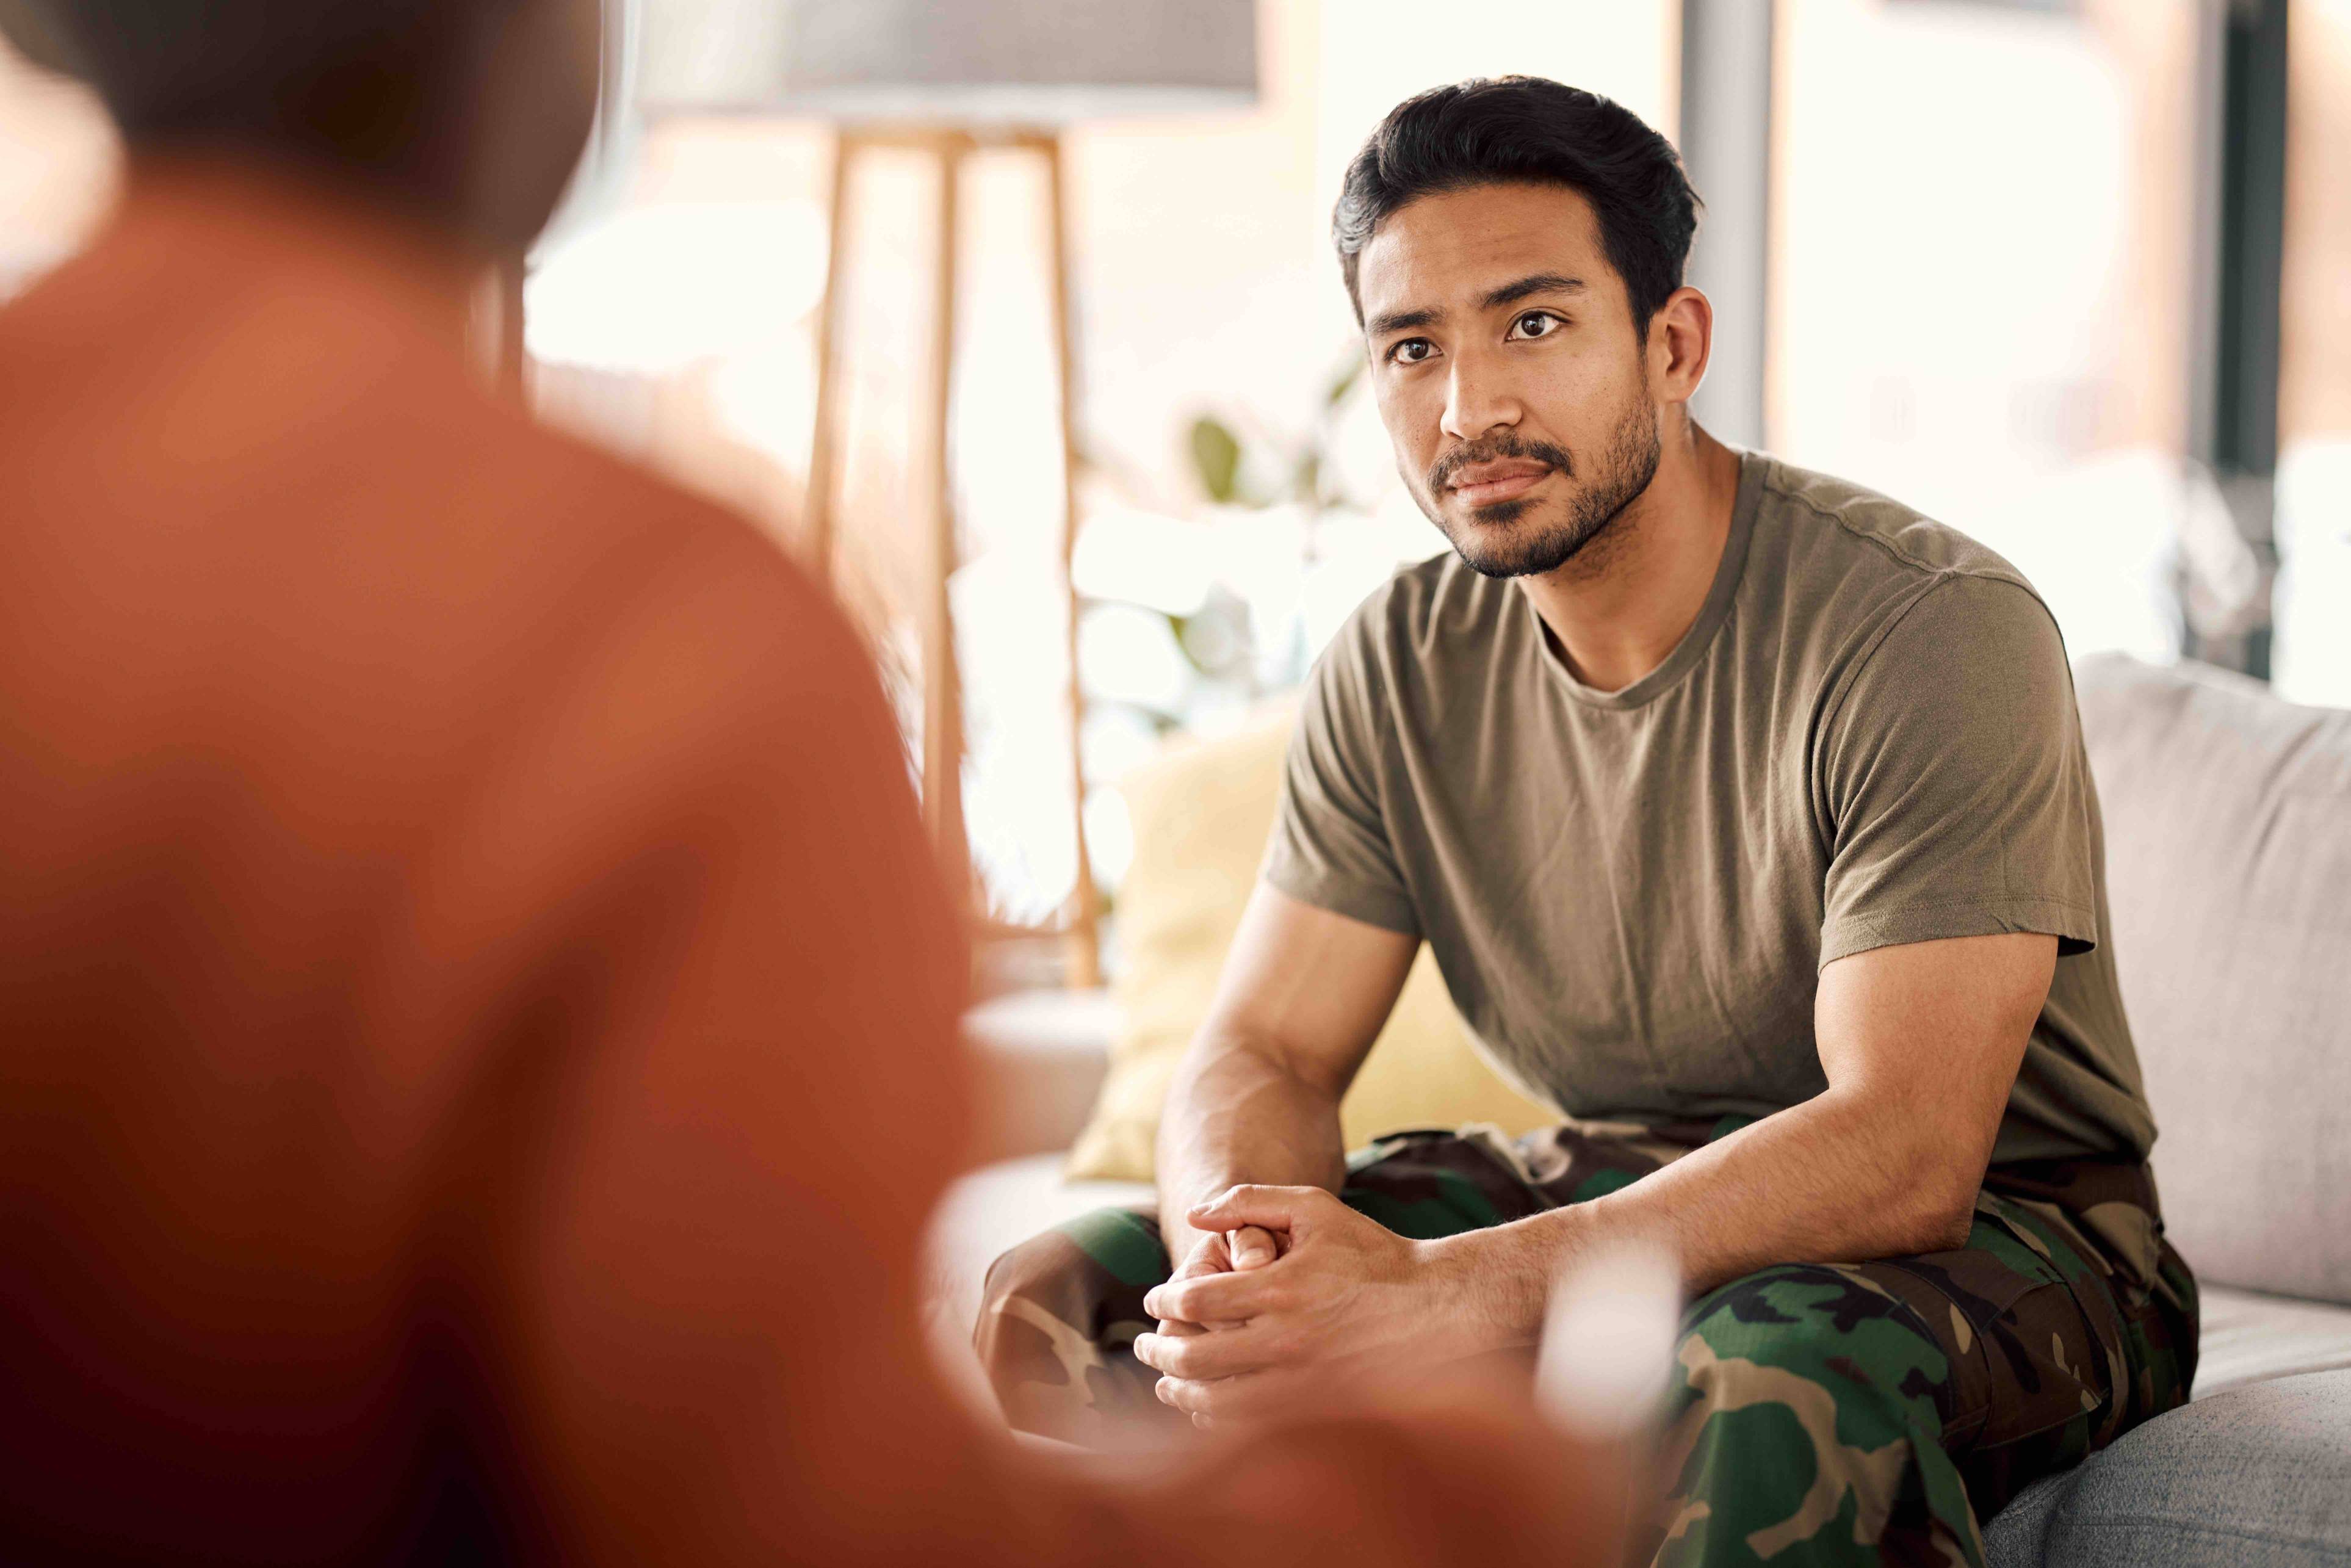 A veteran receiving counseling services.